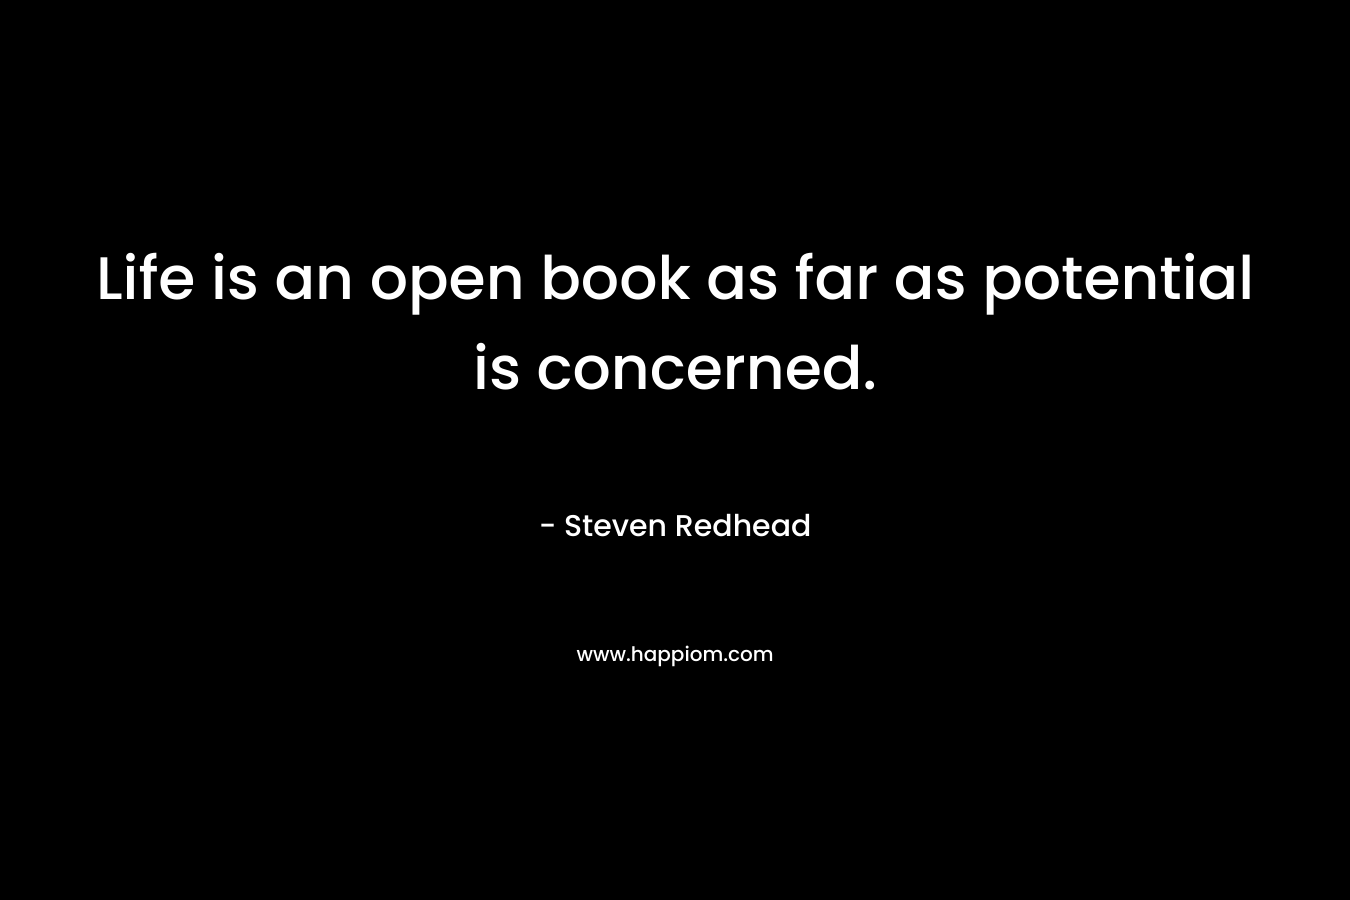 Life is an open book as far as potential is concerned.